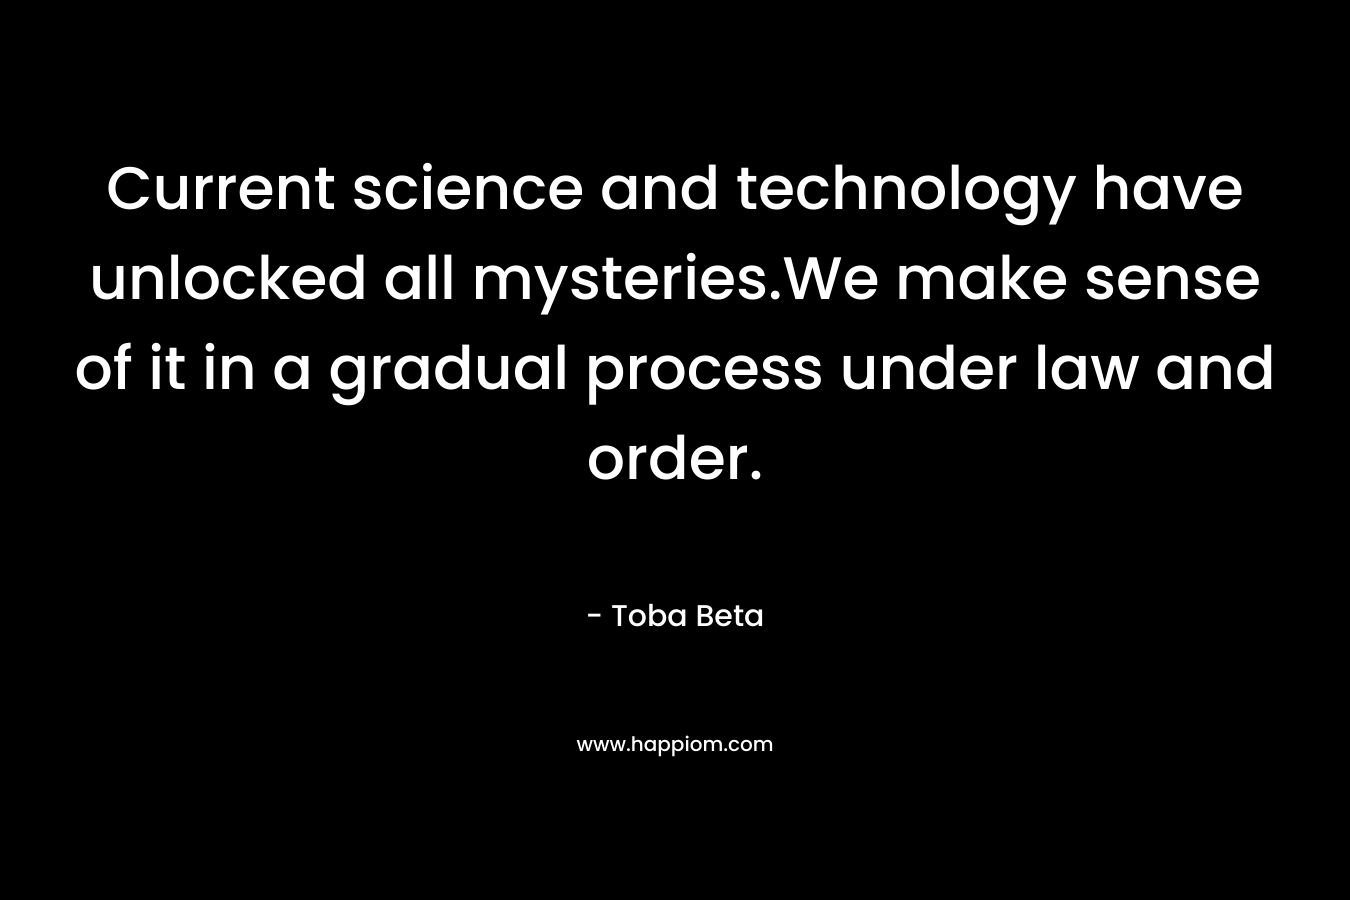 Current science and technology have unlocked all mysteries.We make sense of it in a gradual process under law and order. – Toba Beta